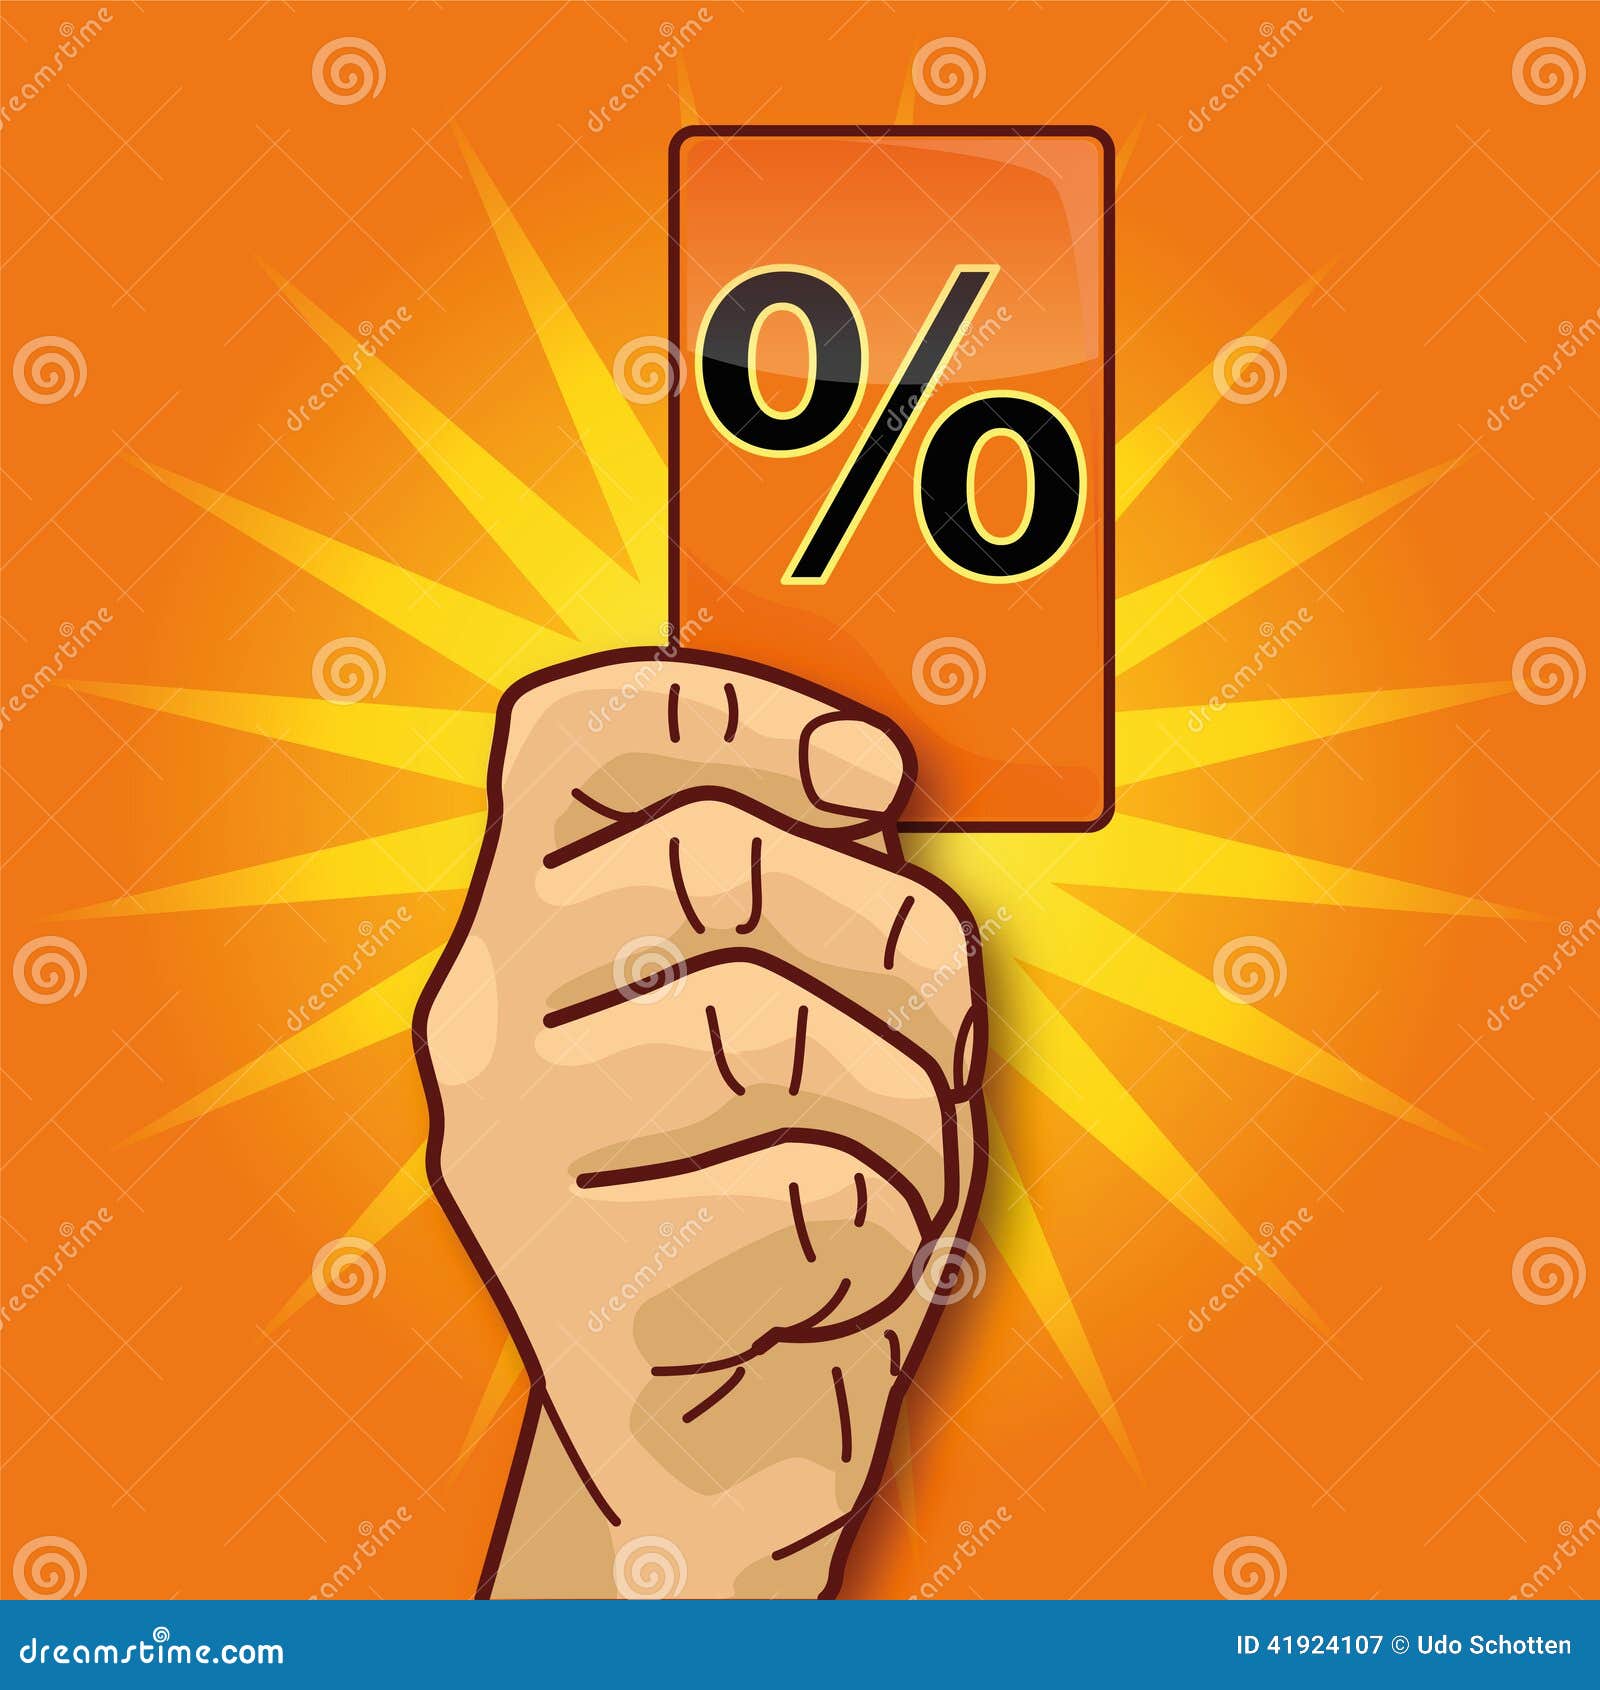 hand showing card with percent card